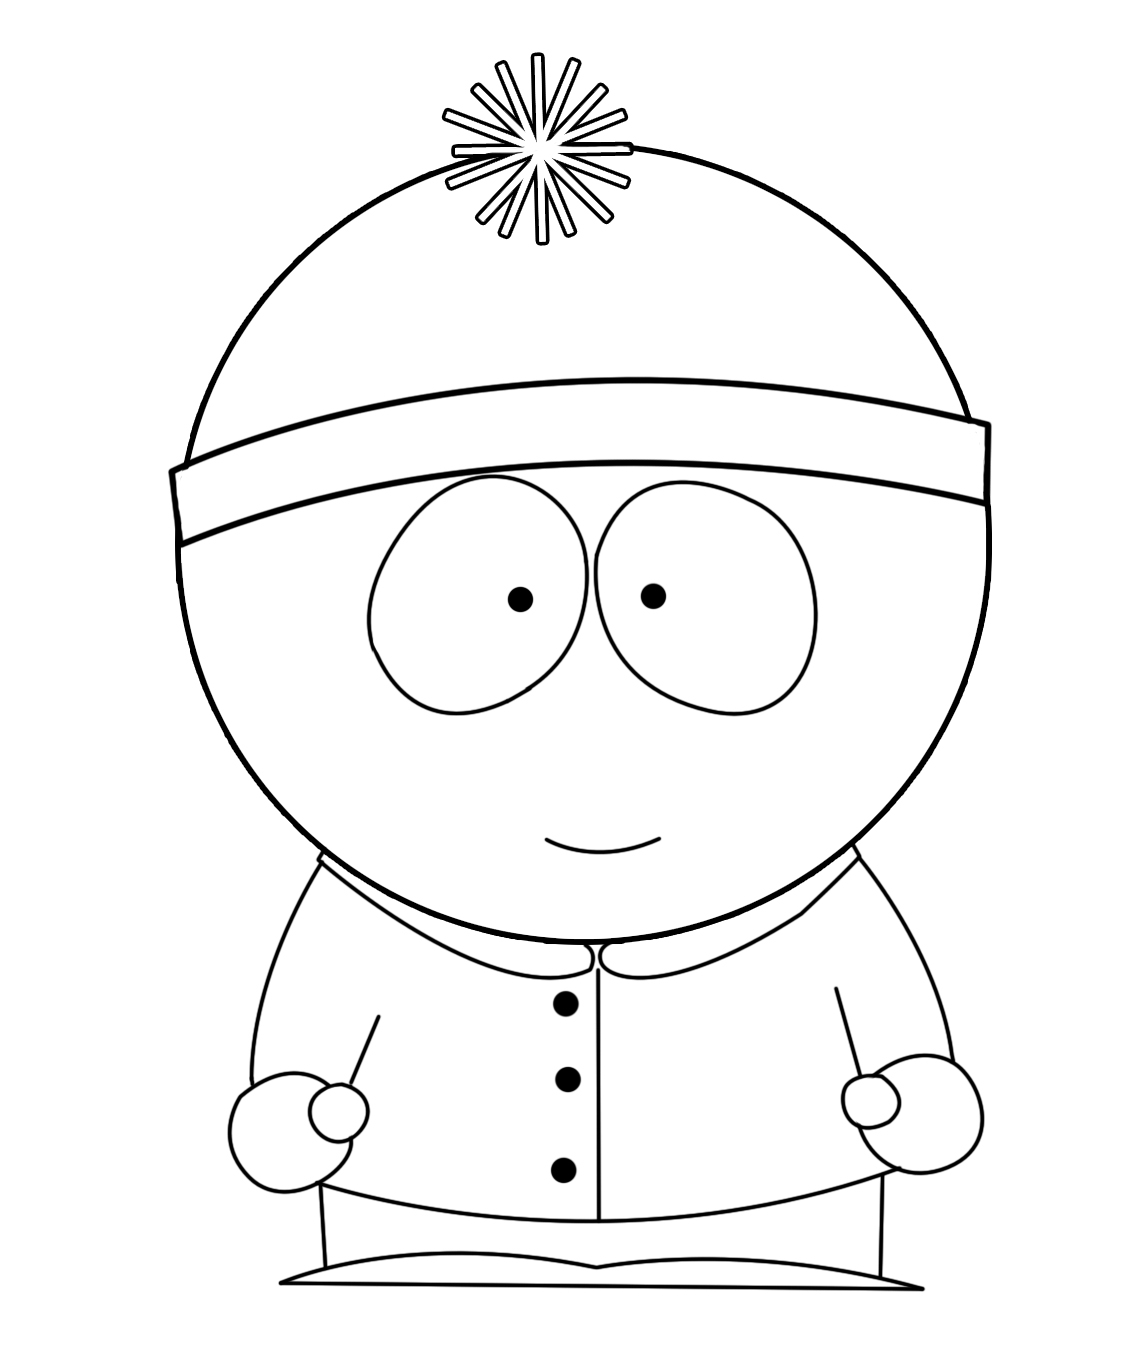 drawings-south-park-cartoons-printable-coloring-pages